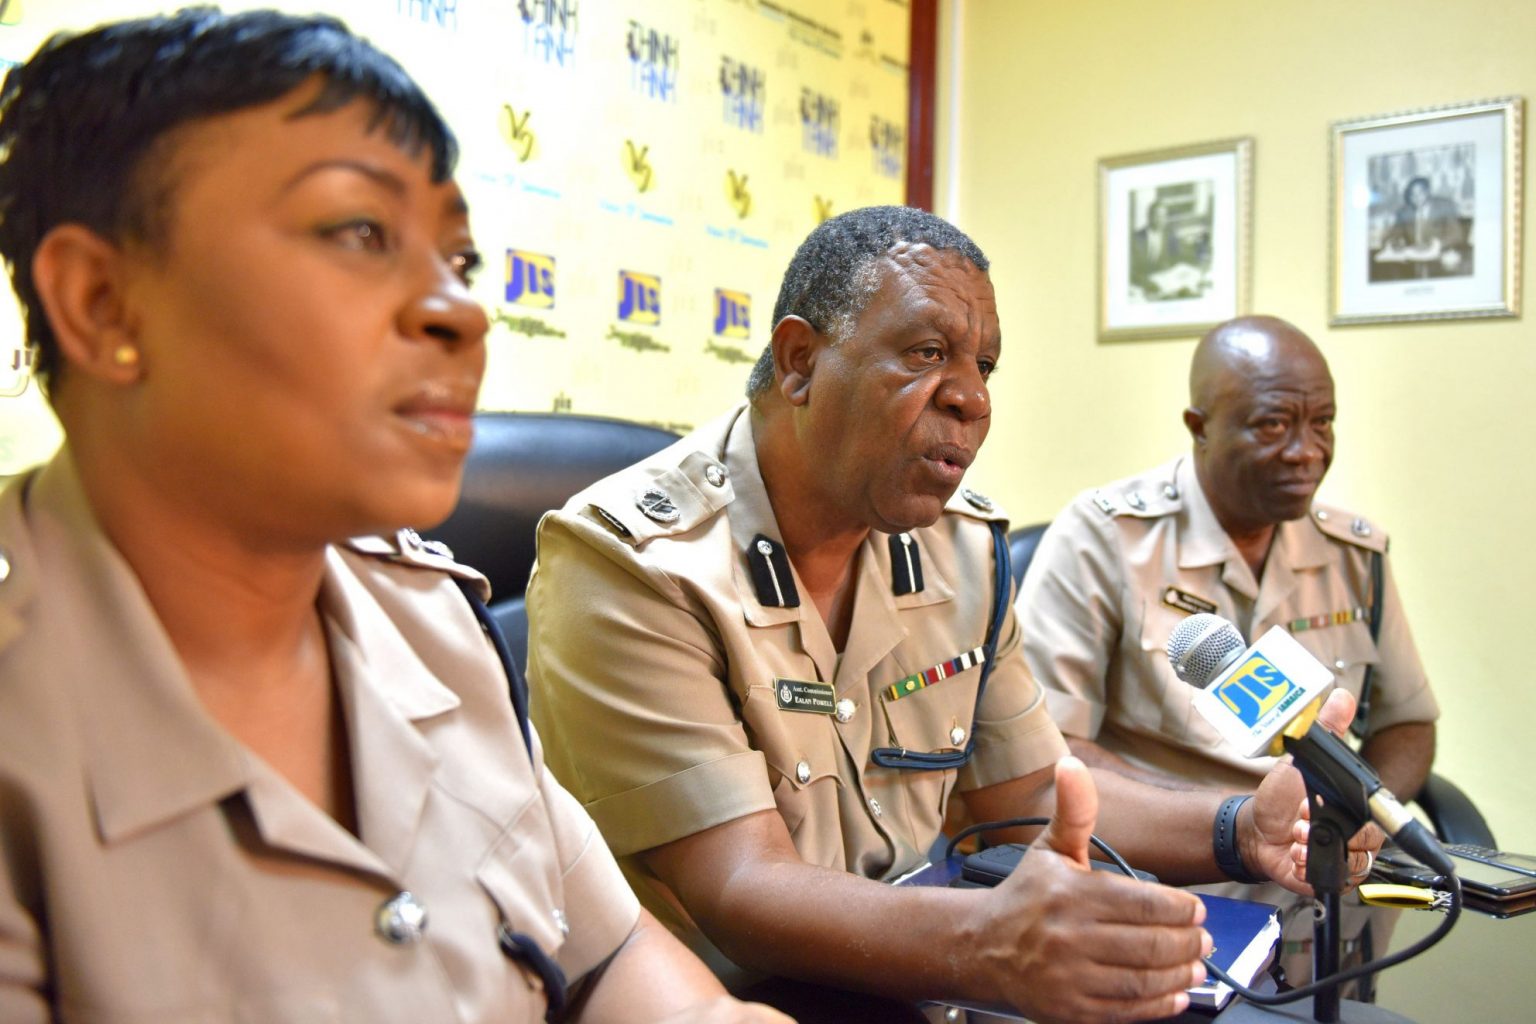 jamaican-authorities-warn-about-noise-levels-and-safety-code-at-party-spots-dancehallmag